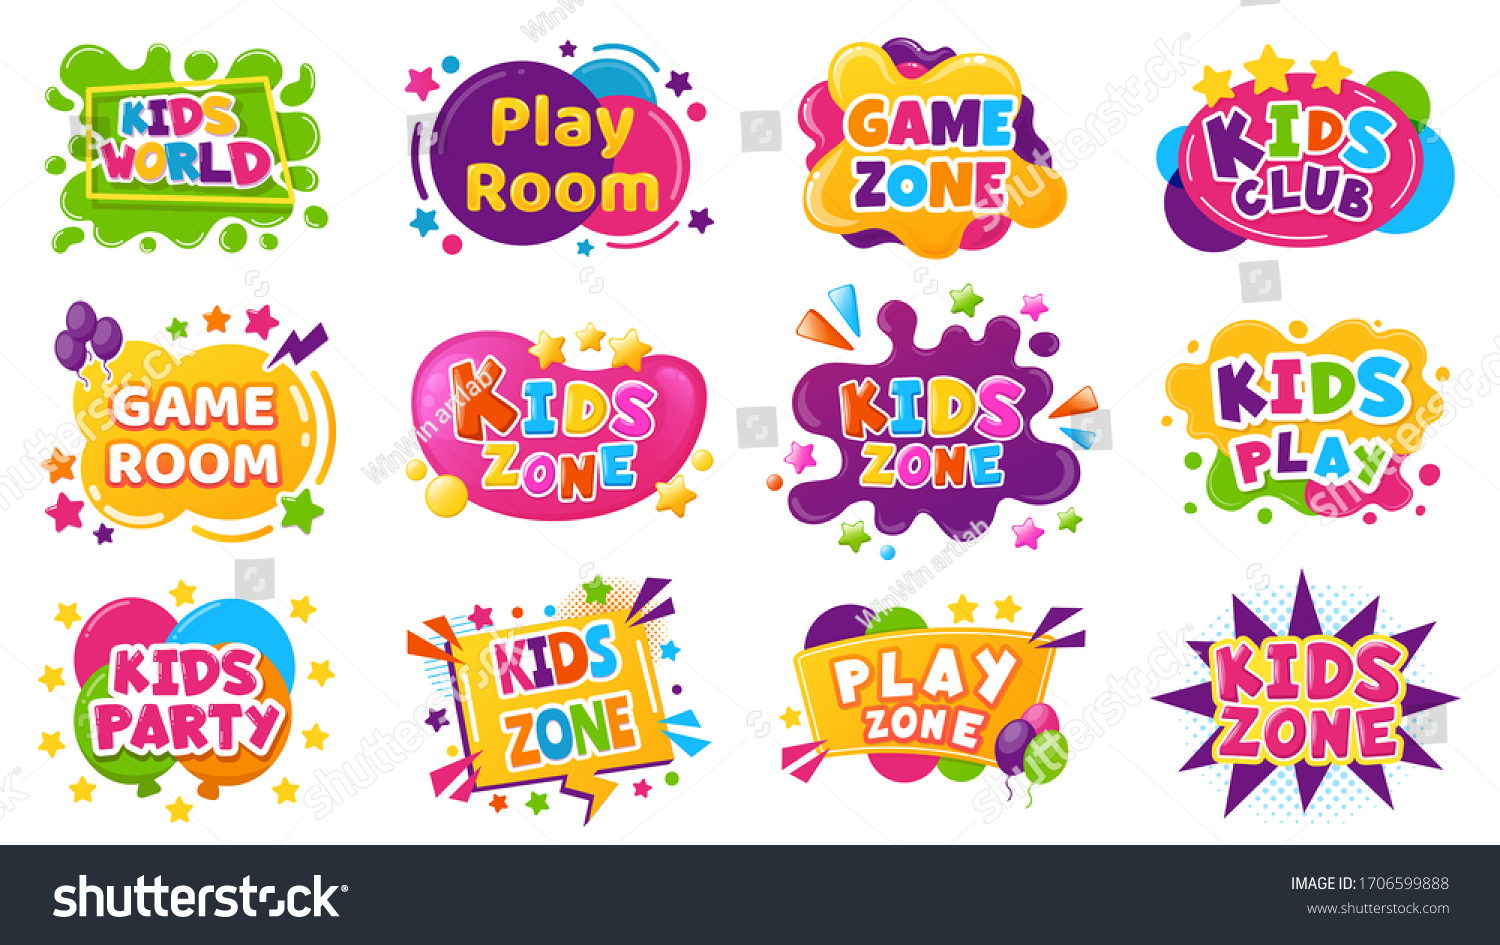 Kids entertainment badges. Game room party labels, children education and entertainment club elements. Baby playing zone vector illustration set. Playroom area, child and kids zone for game #1706599888